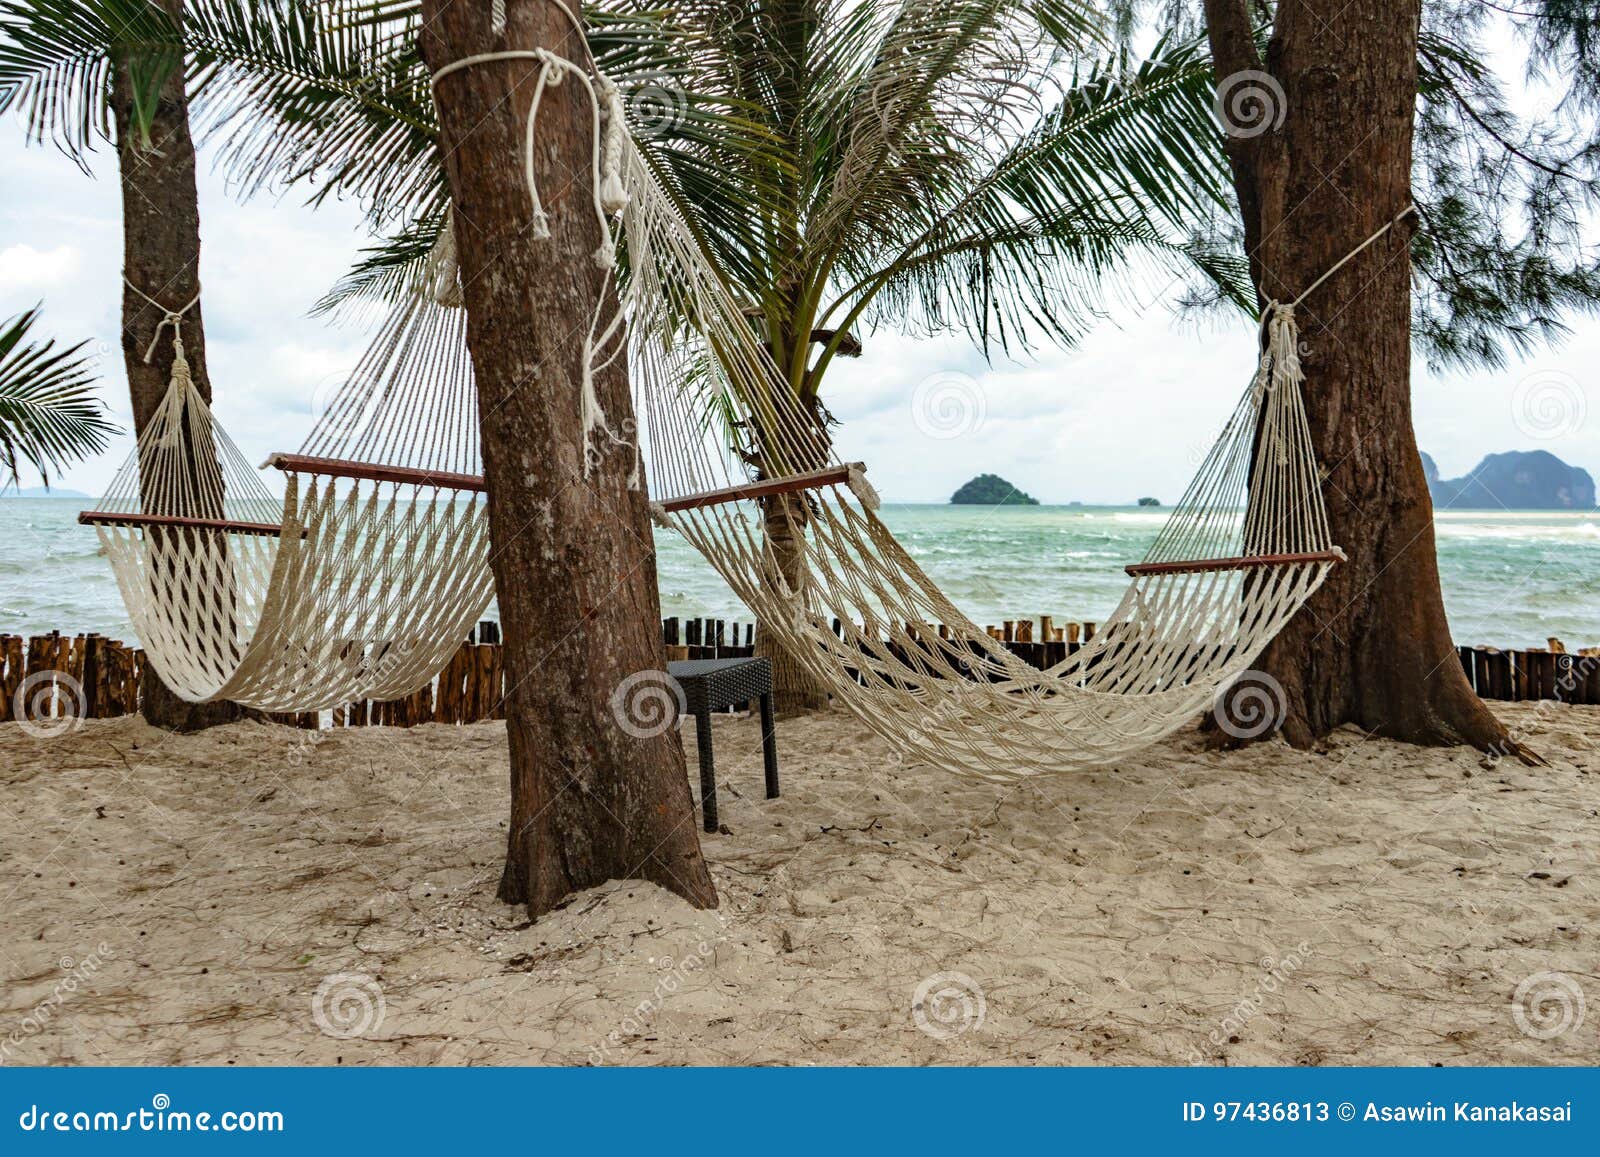 Relax Cot on Tree stock image. Image of paradise, cradle - 97436813